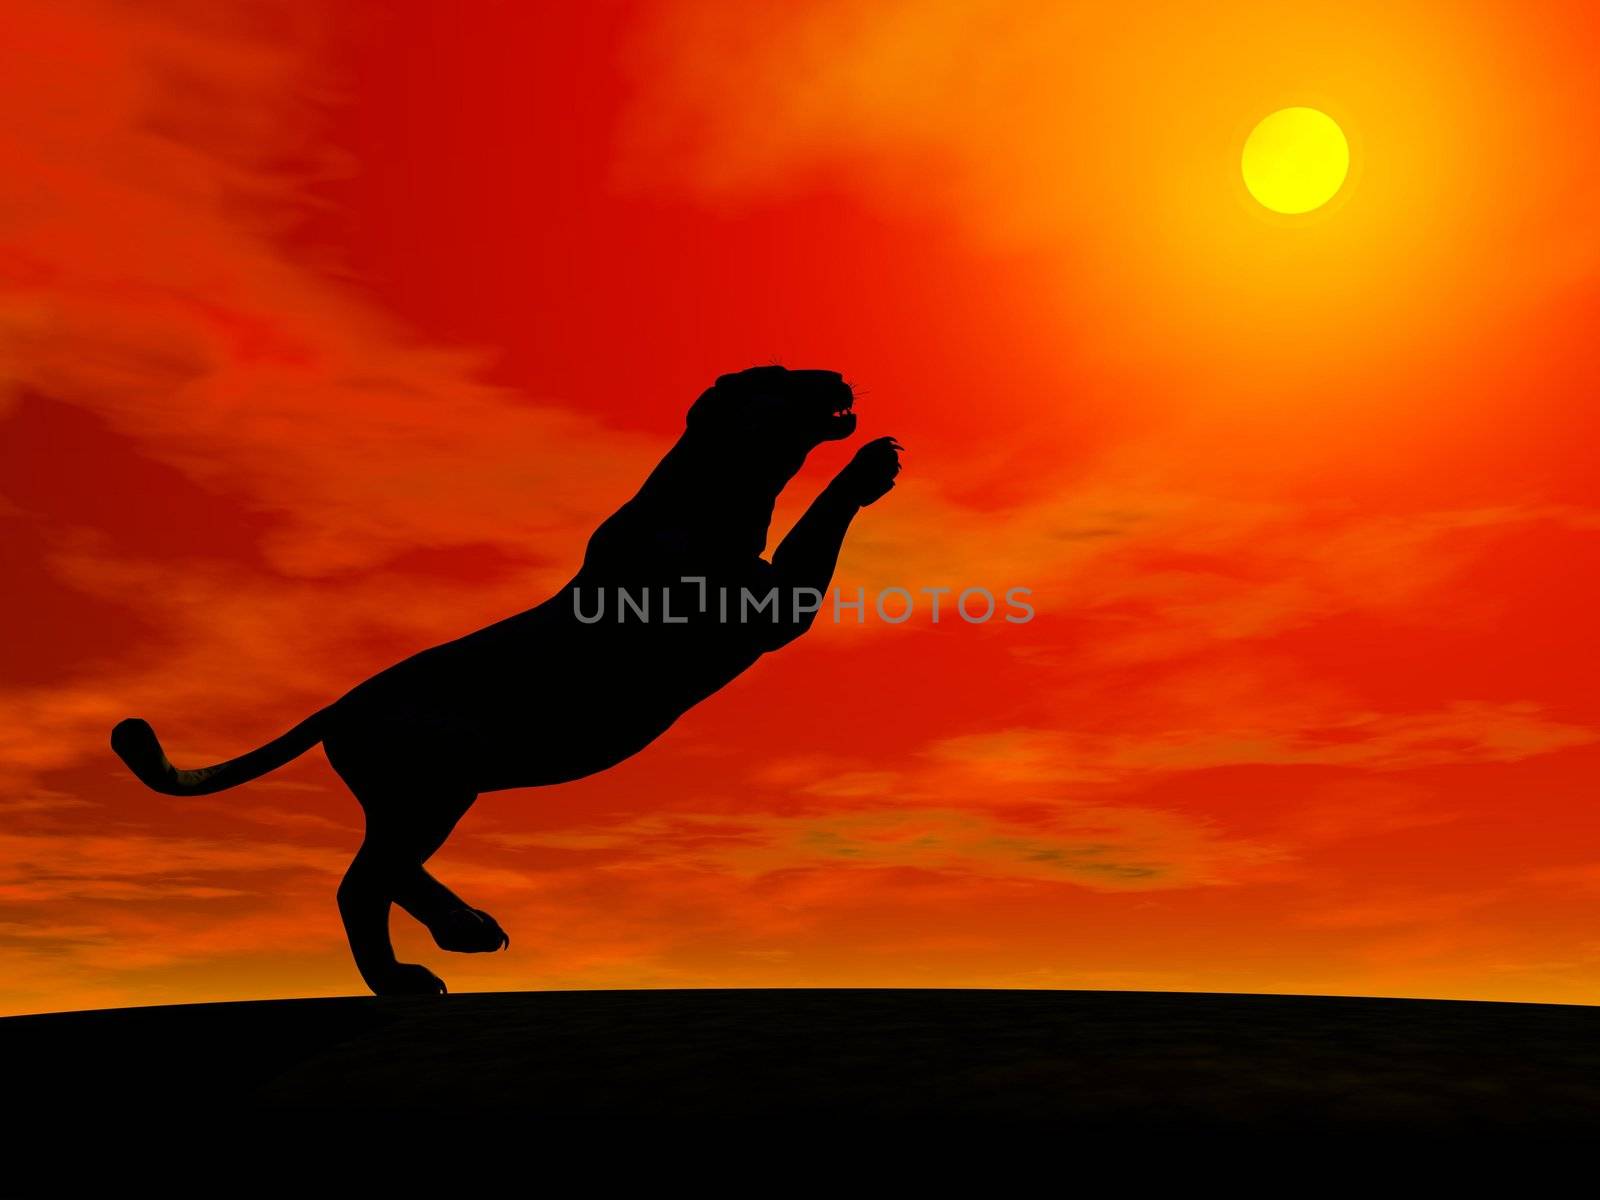 Shadow of one panther jumping to the sun in red background